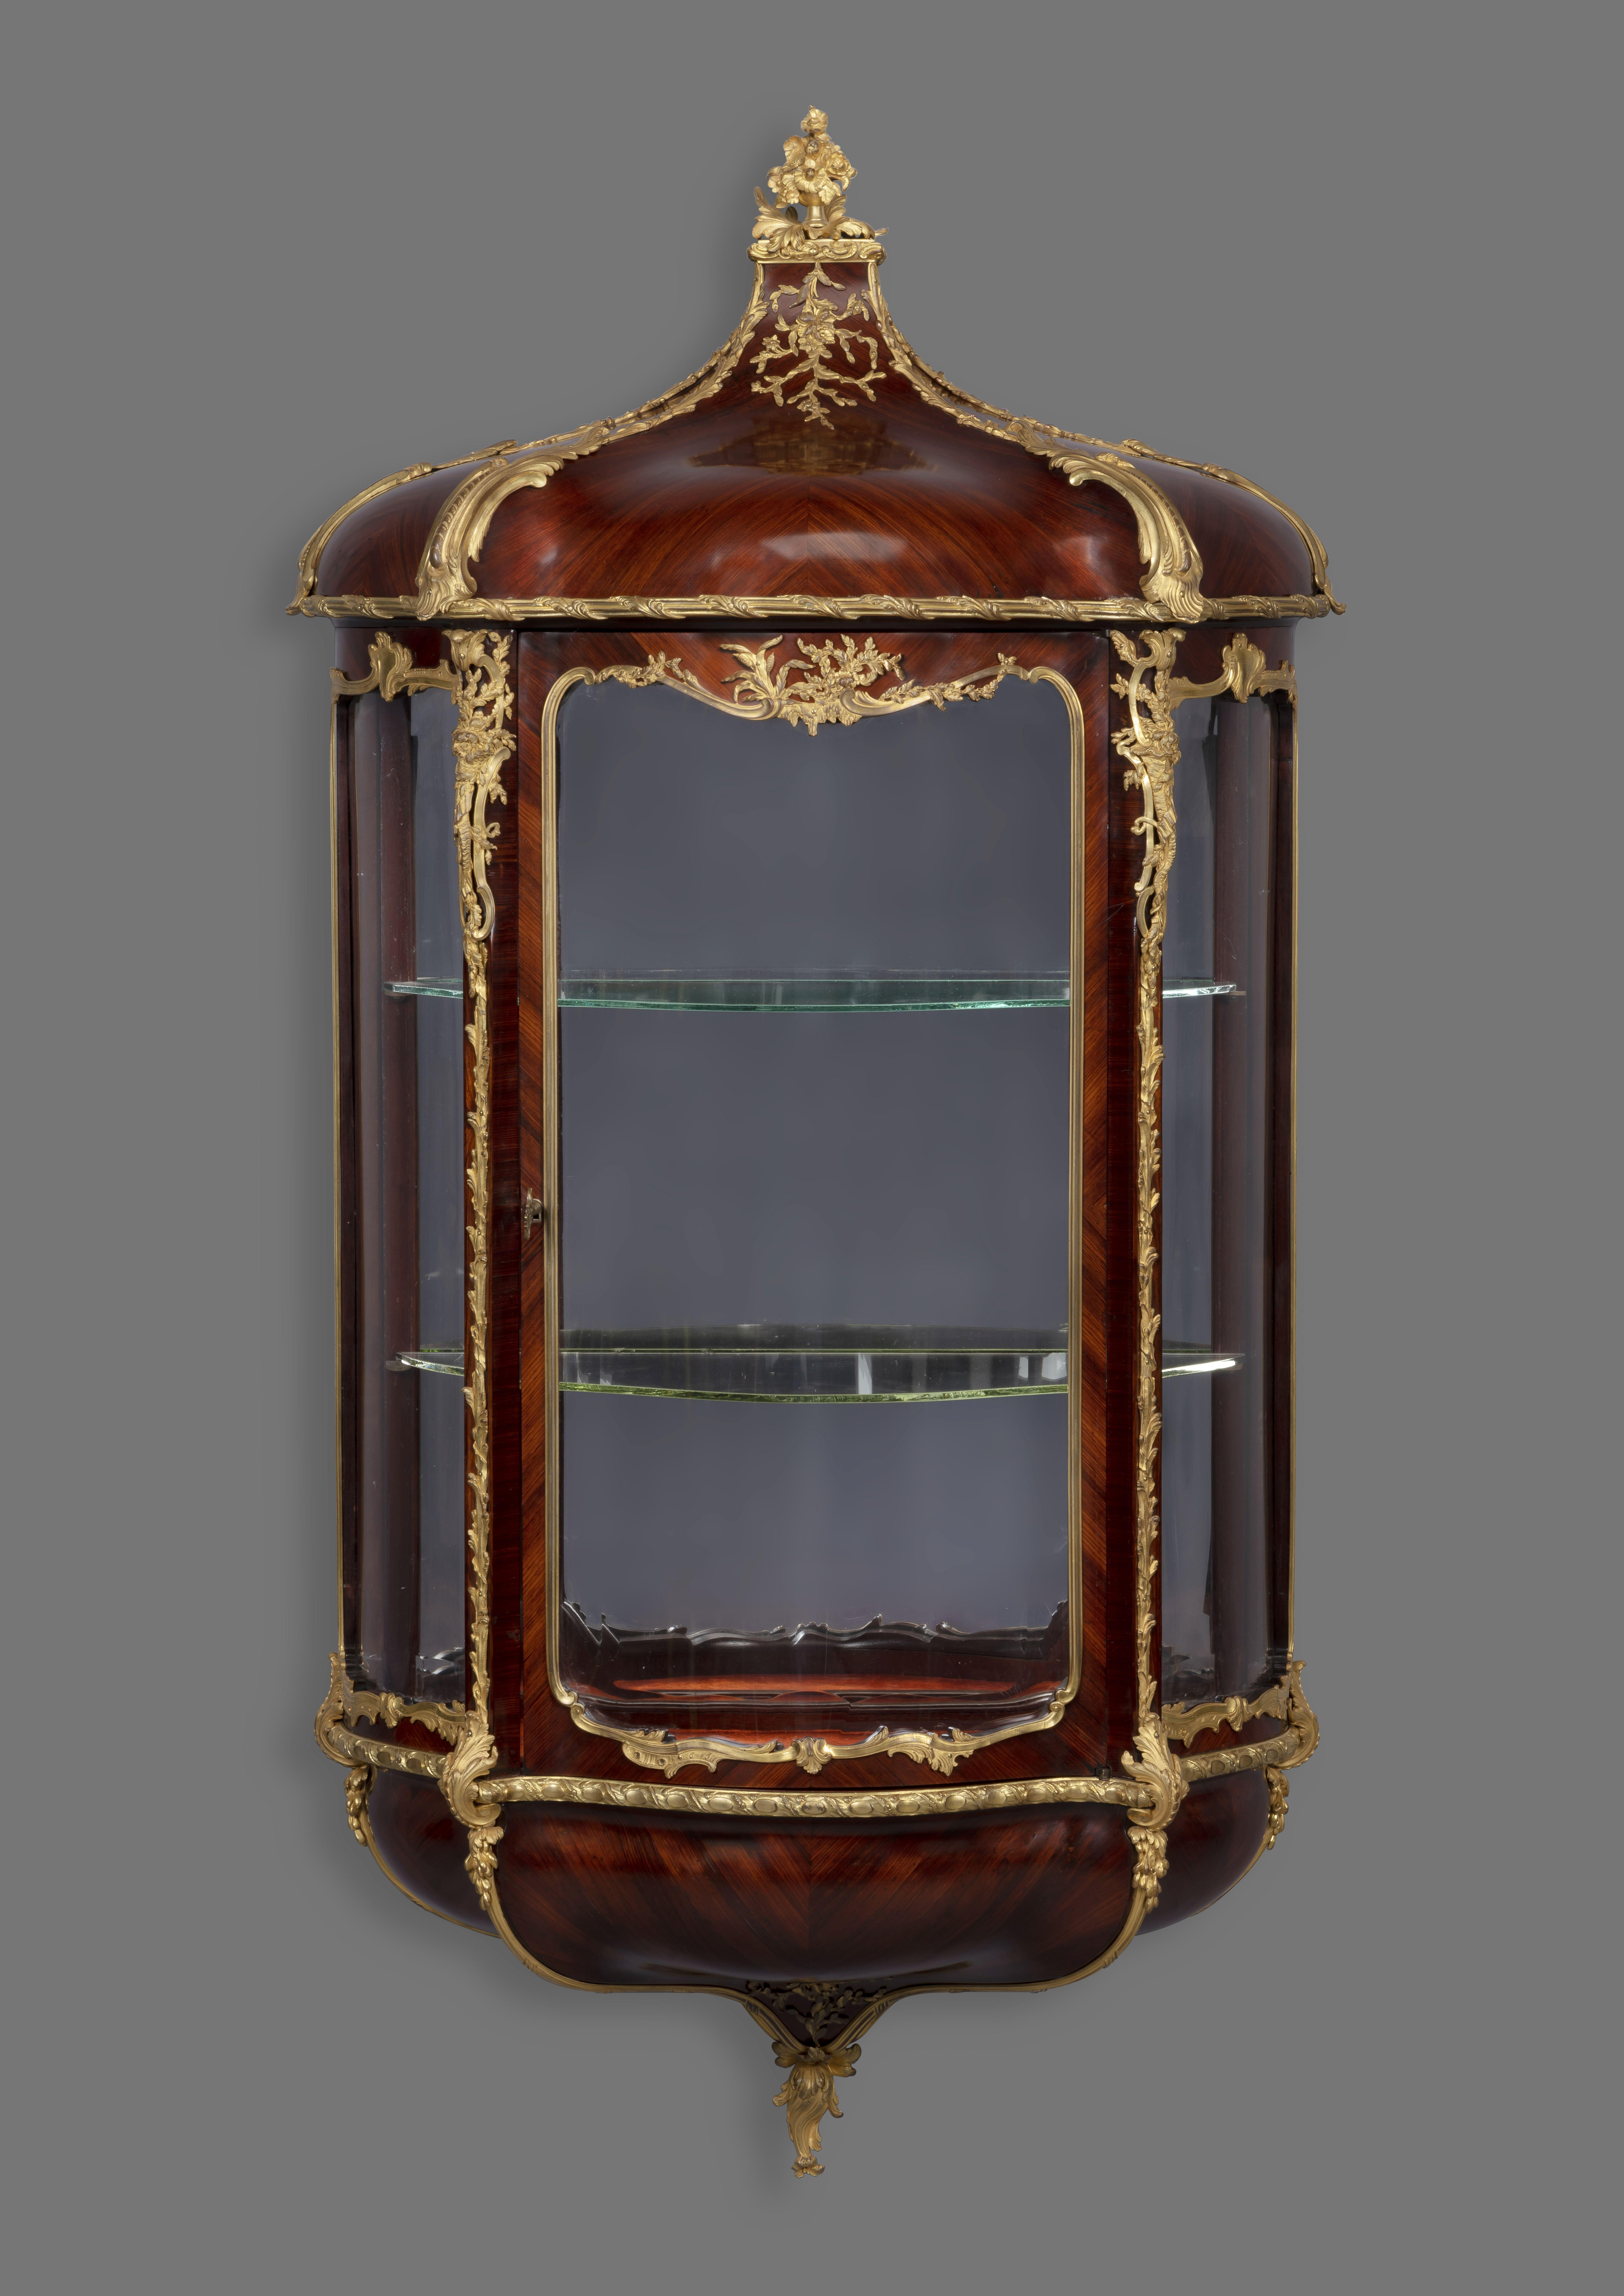 Gilt Rare Matched Pair of Louis XVI Style Wall Vitrines by Zwiener, circa 1890 For Sale